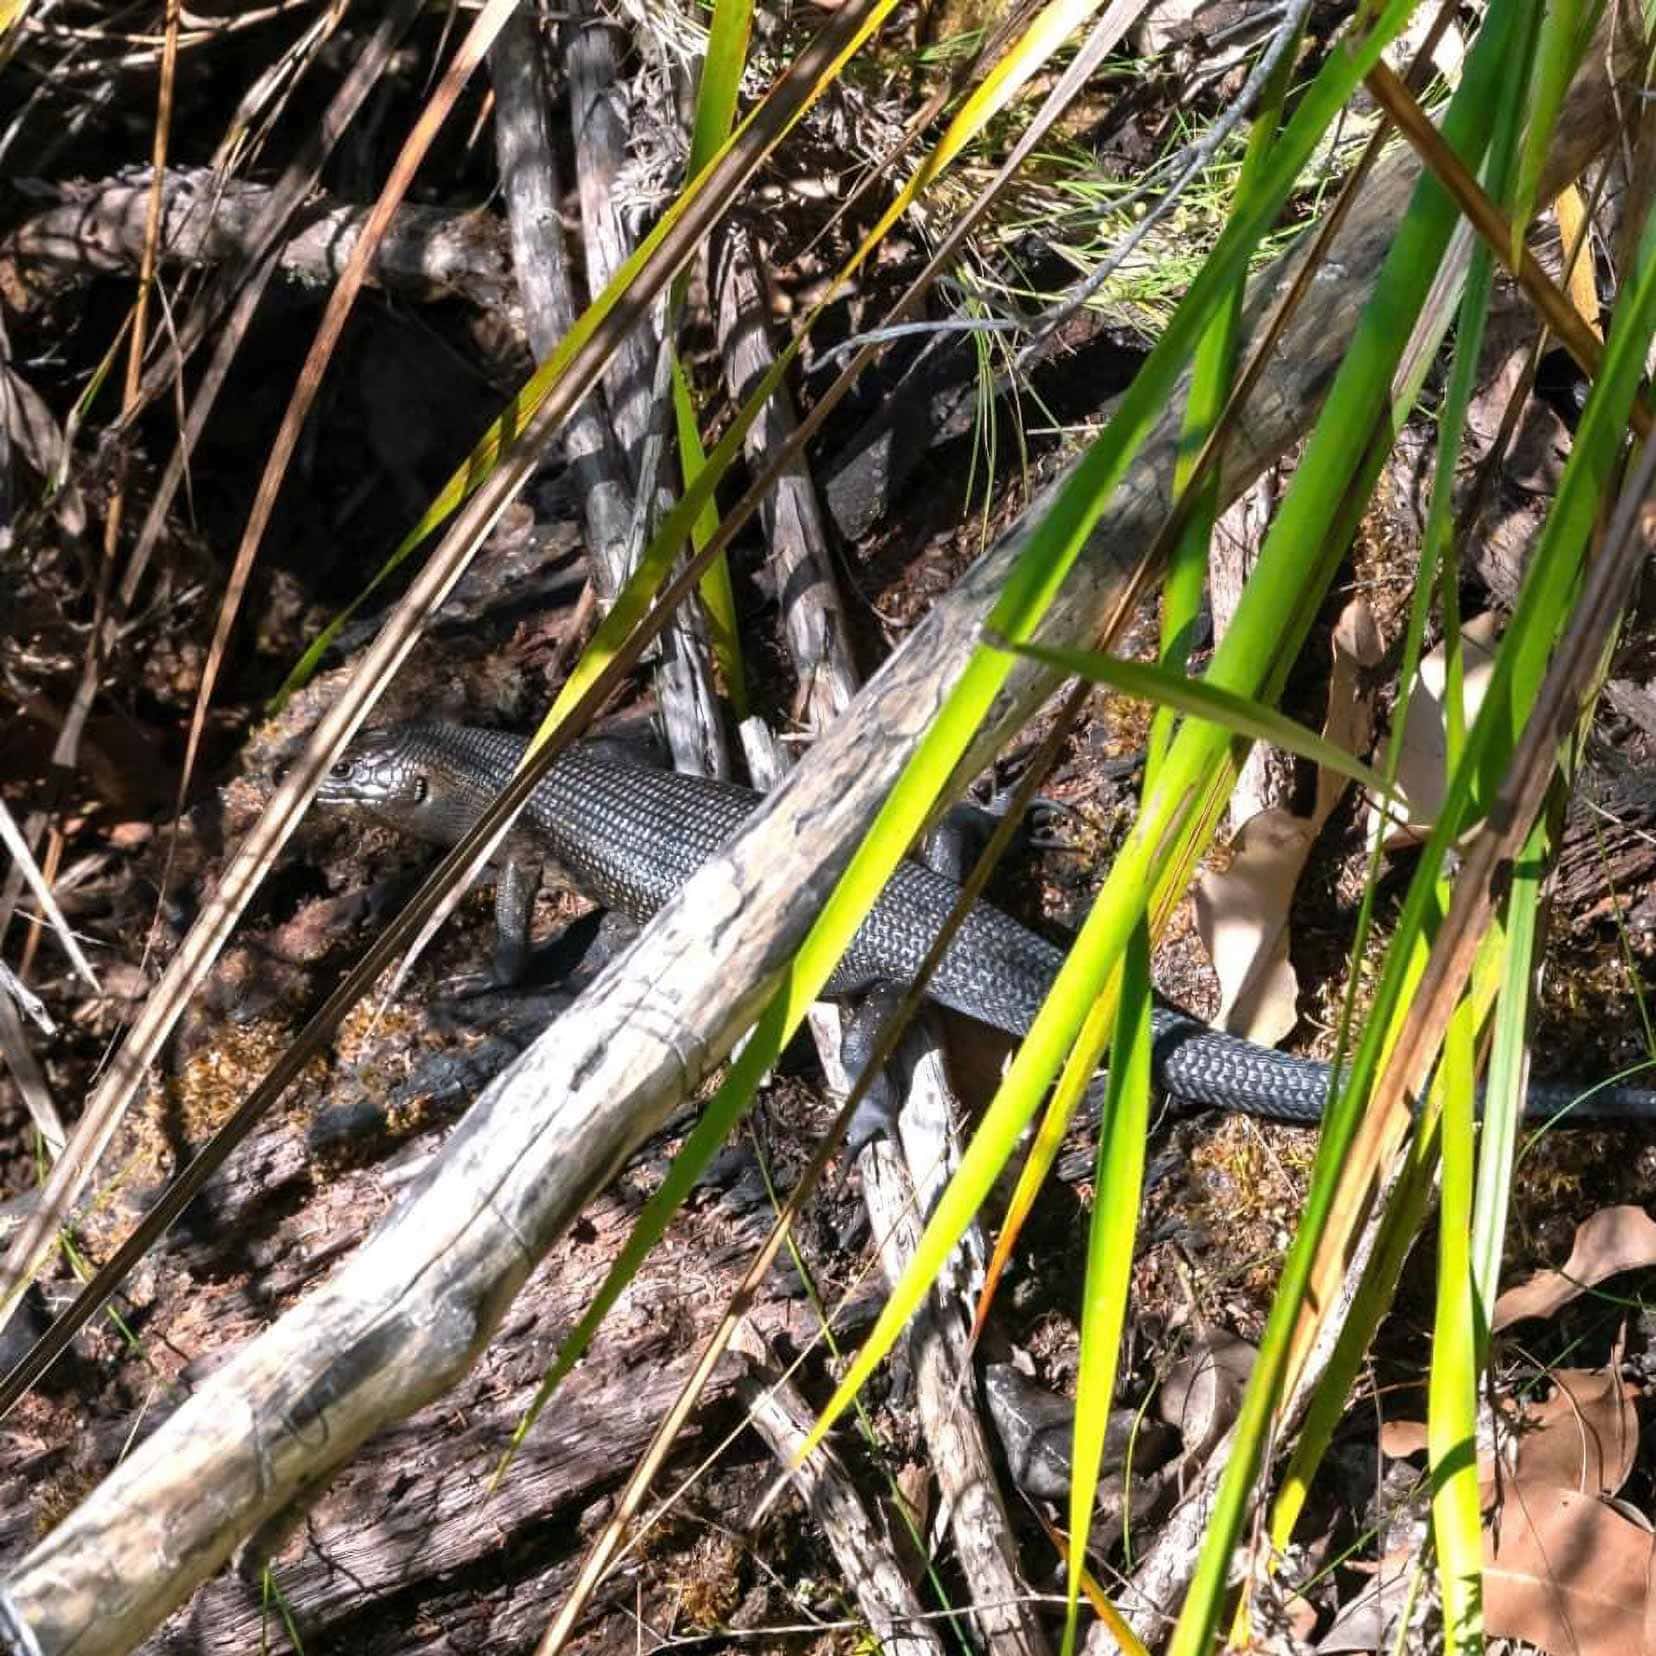 Black scaled lizard in amongst grass and twigs